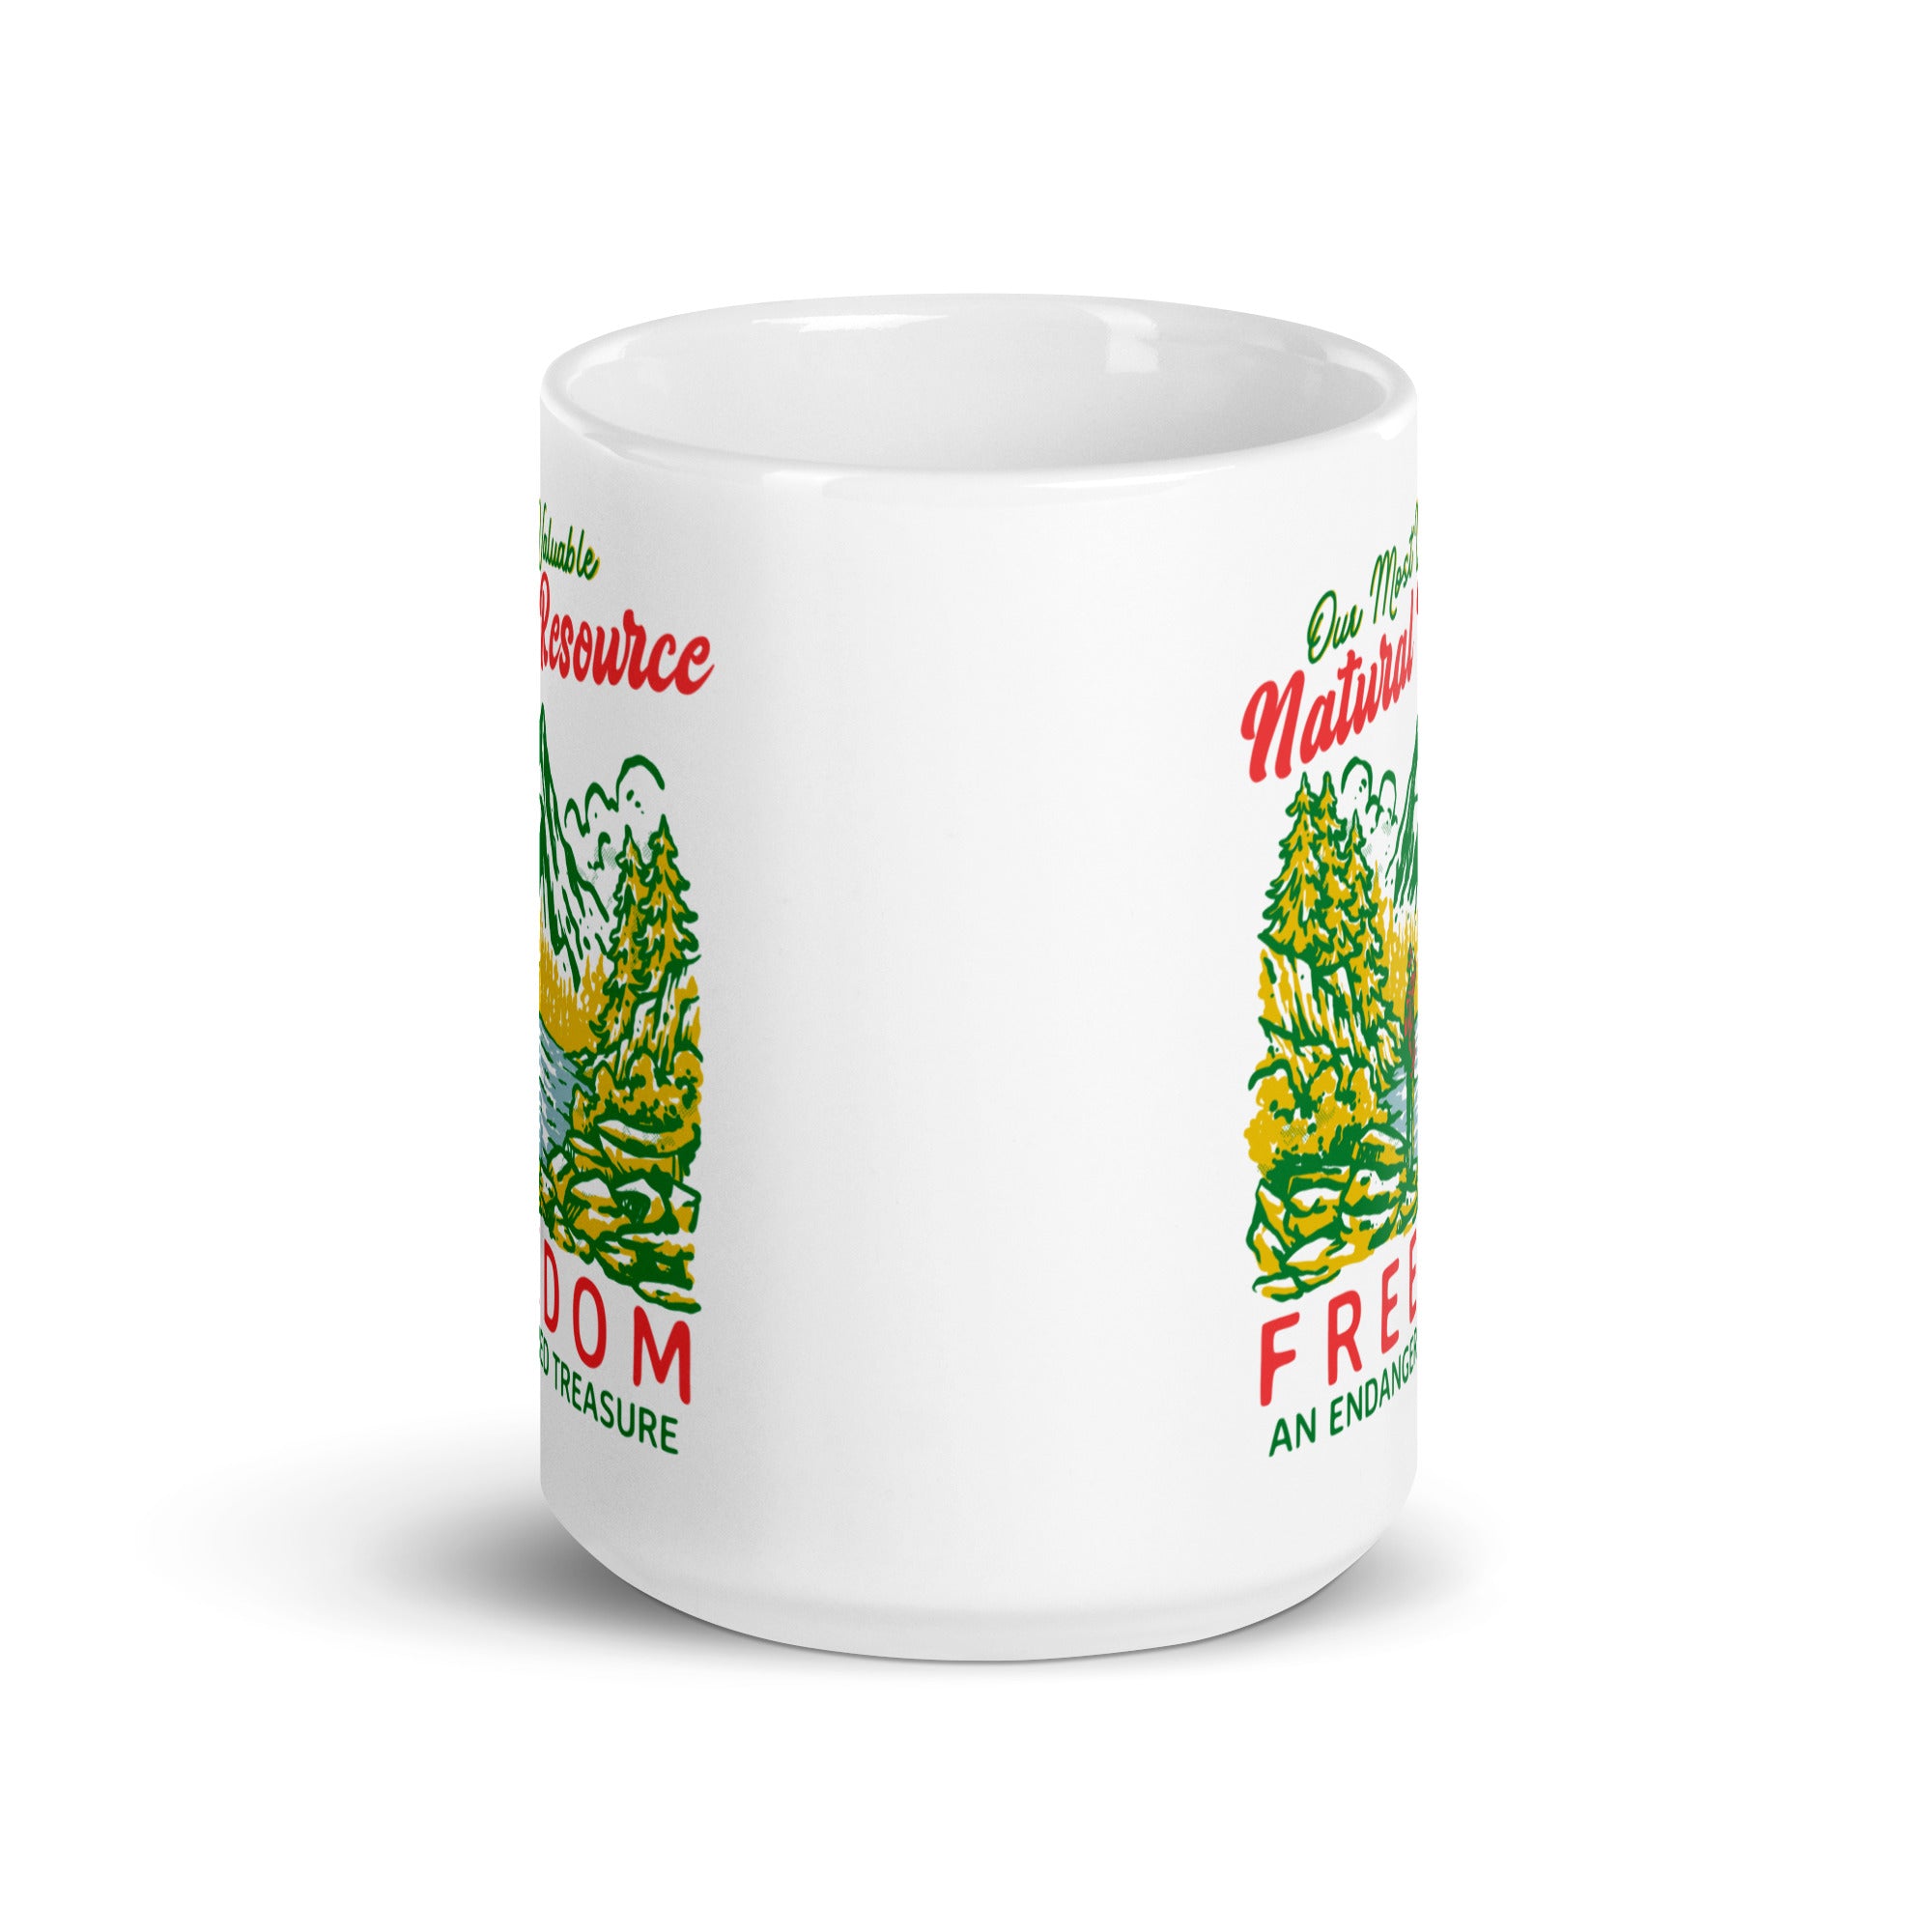 Our Most Valuable Natural Resource Freedom Mug